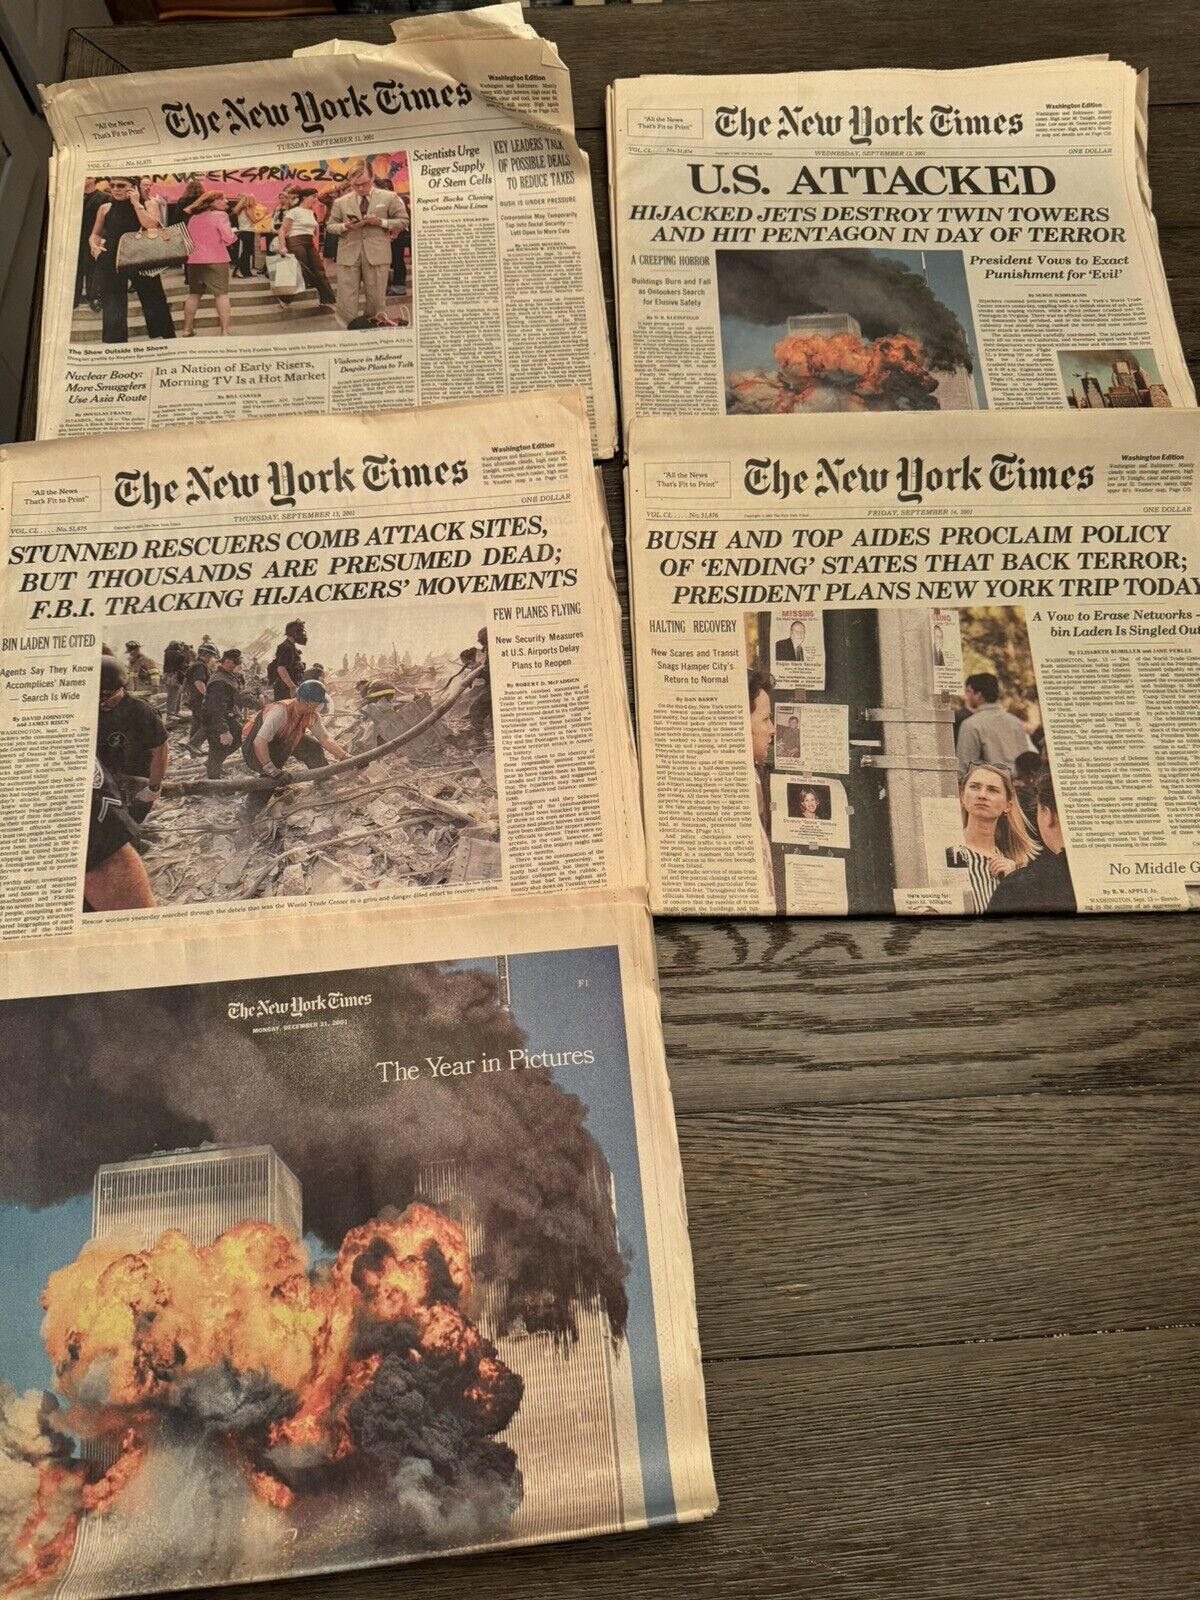 The New York Times Late Edition U.S ATTACKED Sept 12 2001- 9/11 Plus Eight More.